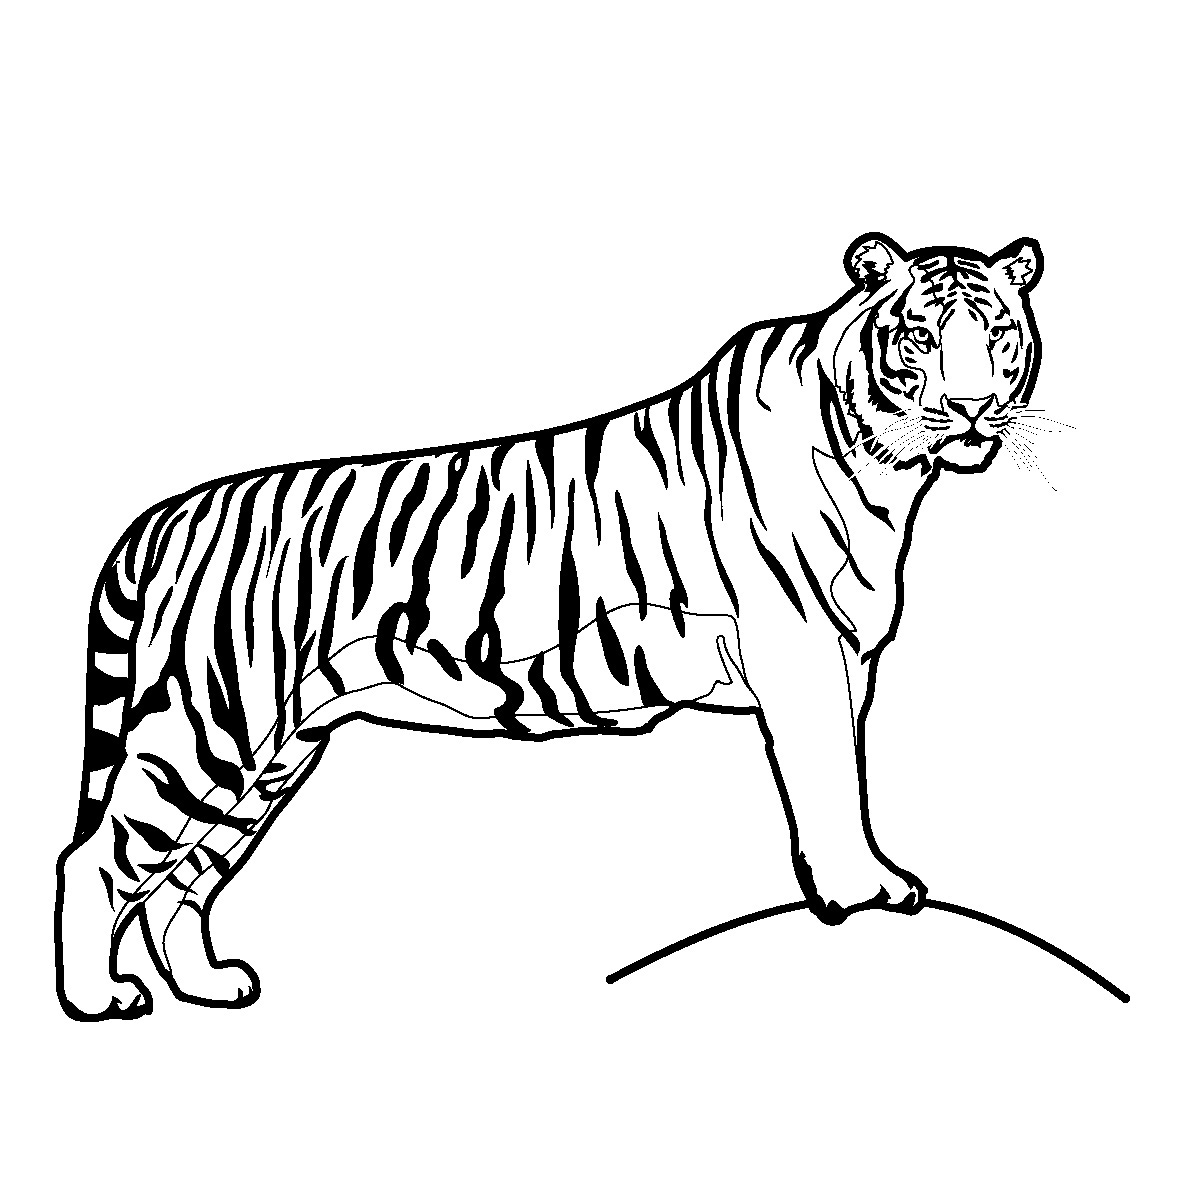 Tiger Clipart Black And White Free   Clipart Panda   Free Clipart